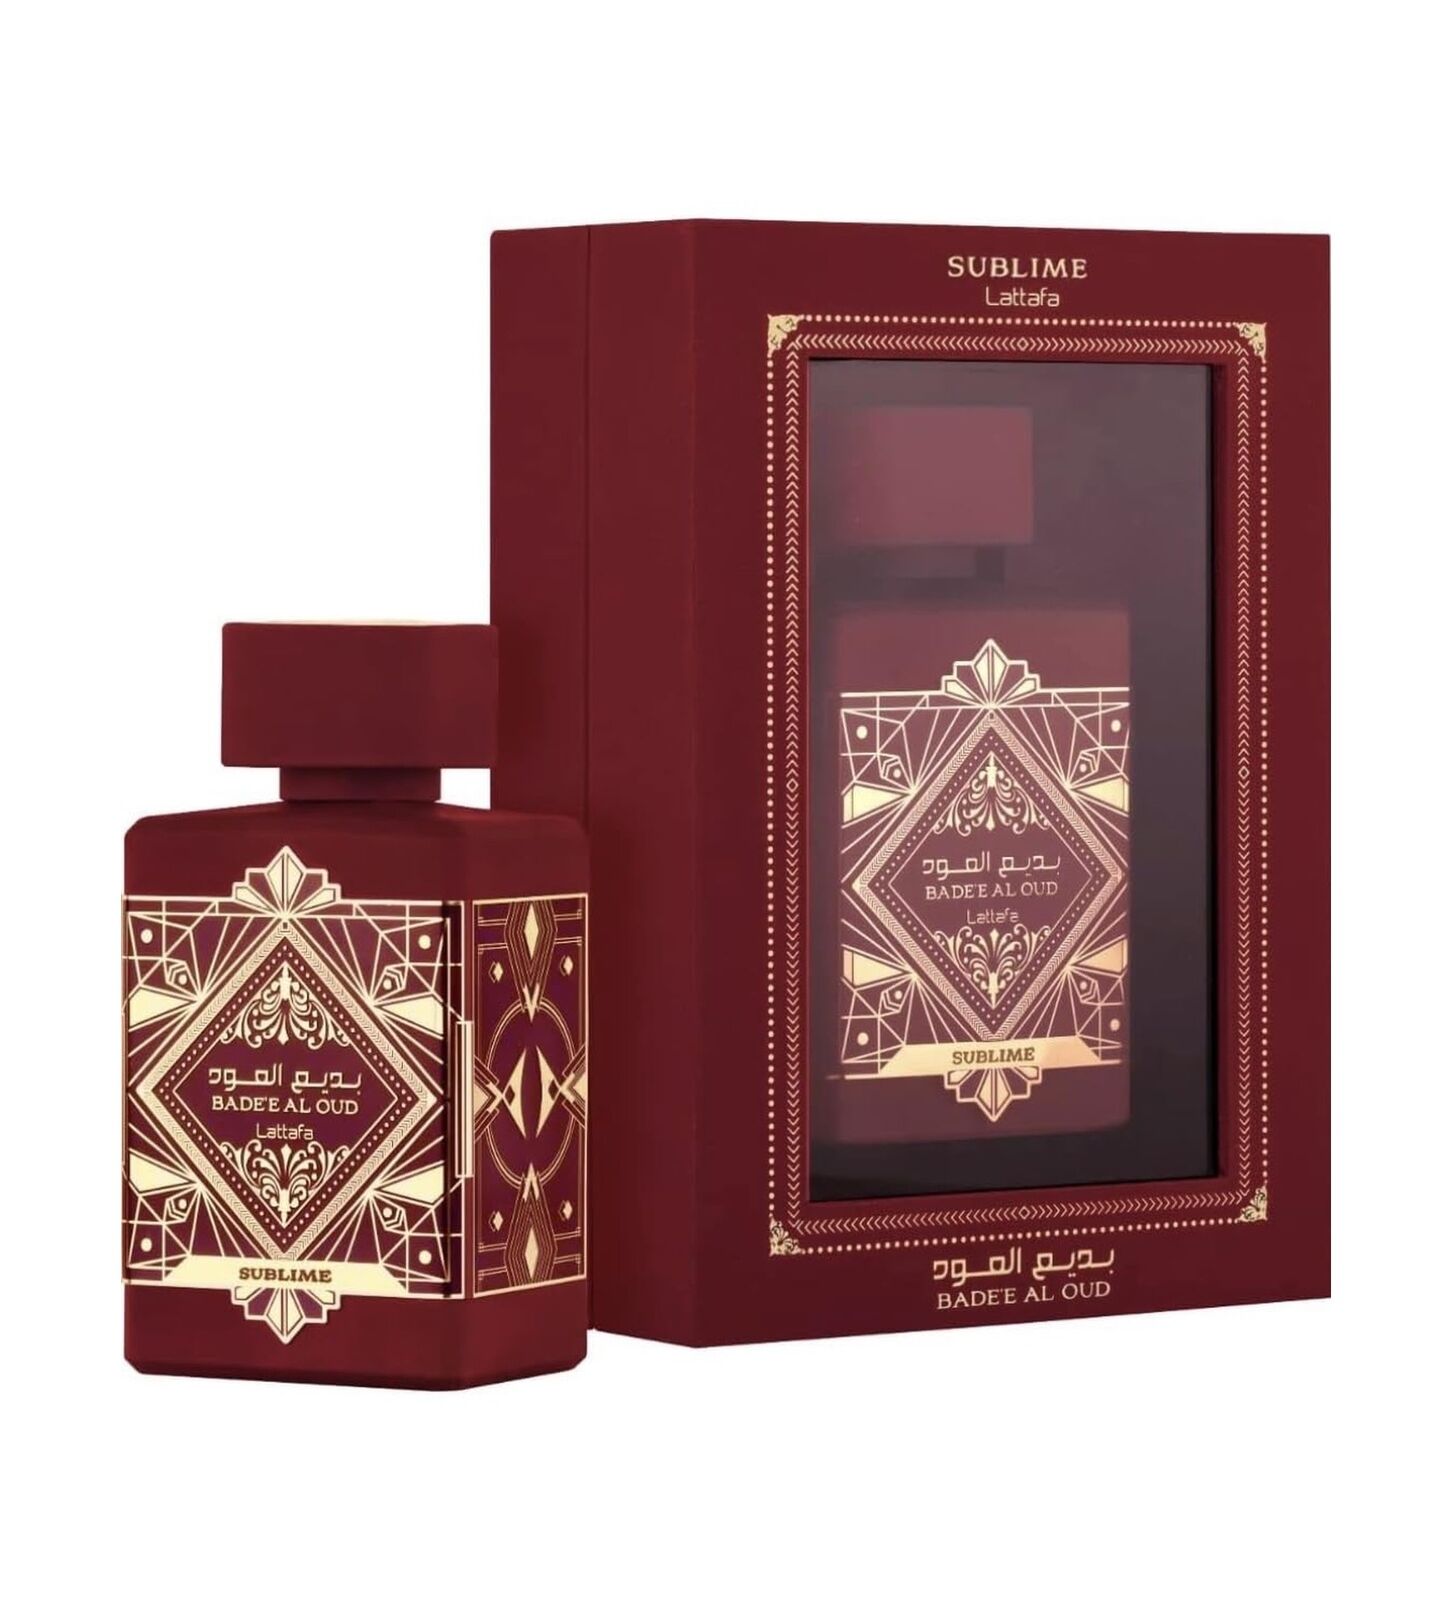 <p>Bade’e Al Oud Eau de Parfum by Lattafa Perfumes is a smoky, aromatic Oudh perfume for women and men. A trio of lavender, saffron and nutmeg open the perfume in the top note. Woody and earthy warm follow the heart notes with Oudh and patchouli. A dry, smoky base of Oudh, patchouli and musk forms the perfect finish. Oud For Glory – Bade’e Al Oud is a powerful, rich perfume full of finesse and elegance, perfect for casual and evening wear. Although it is a unisex perfume, it has a masculine touch.</p>